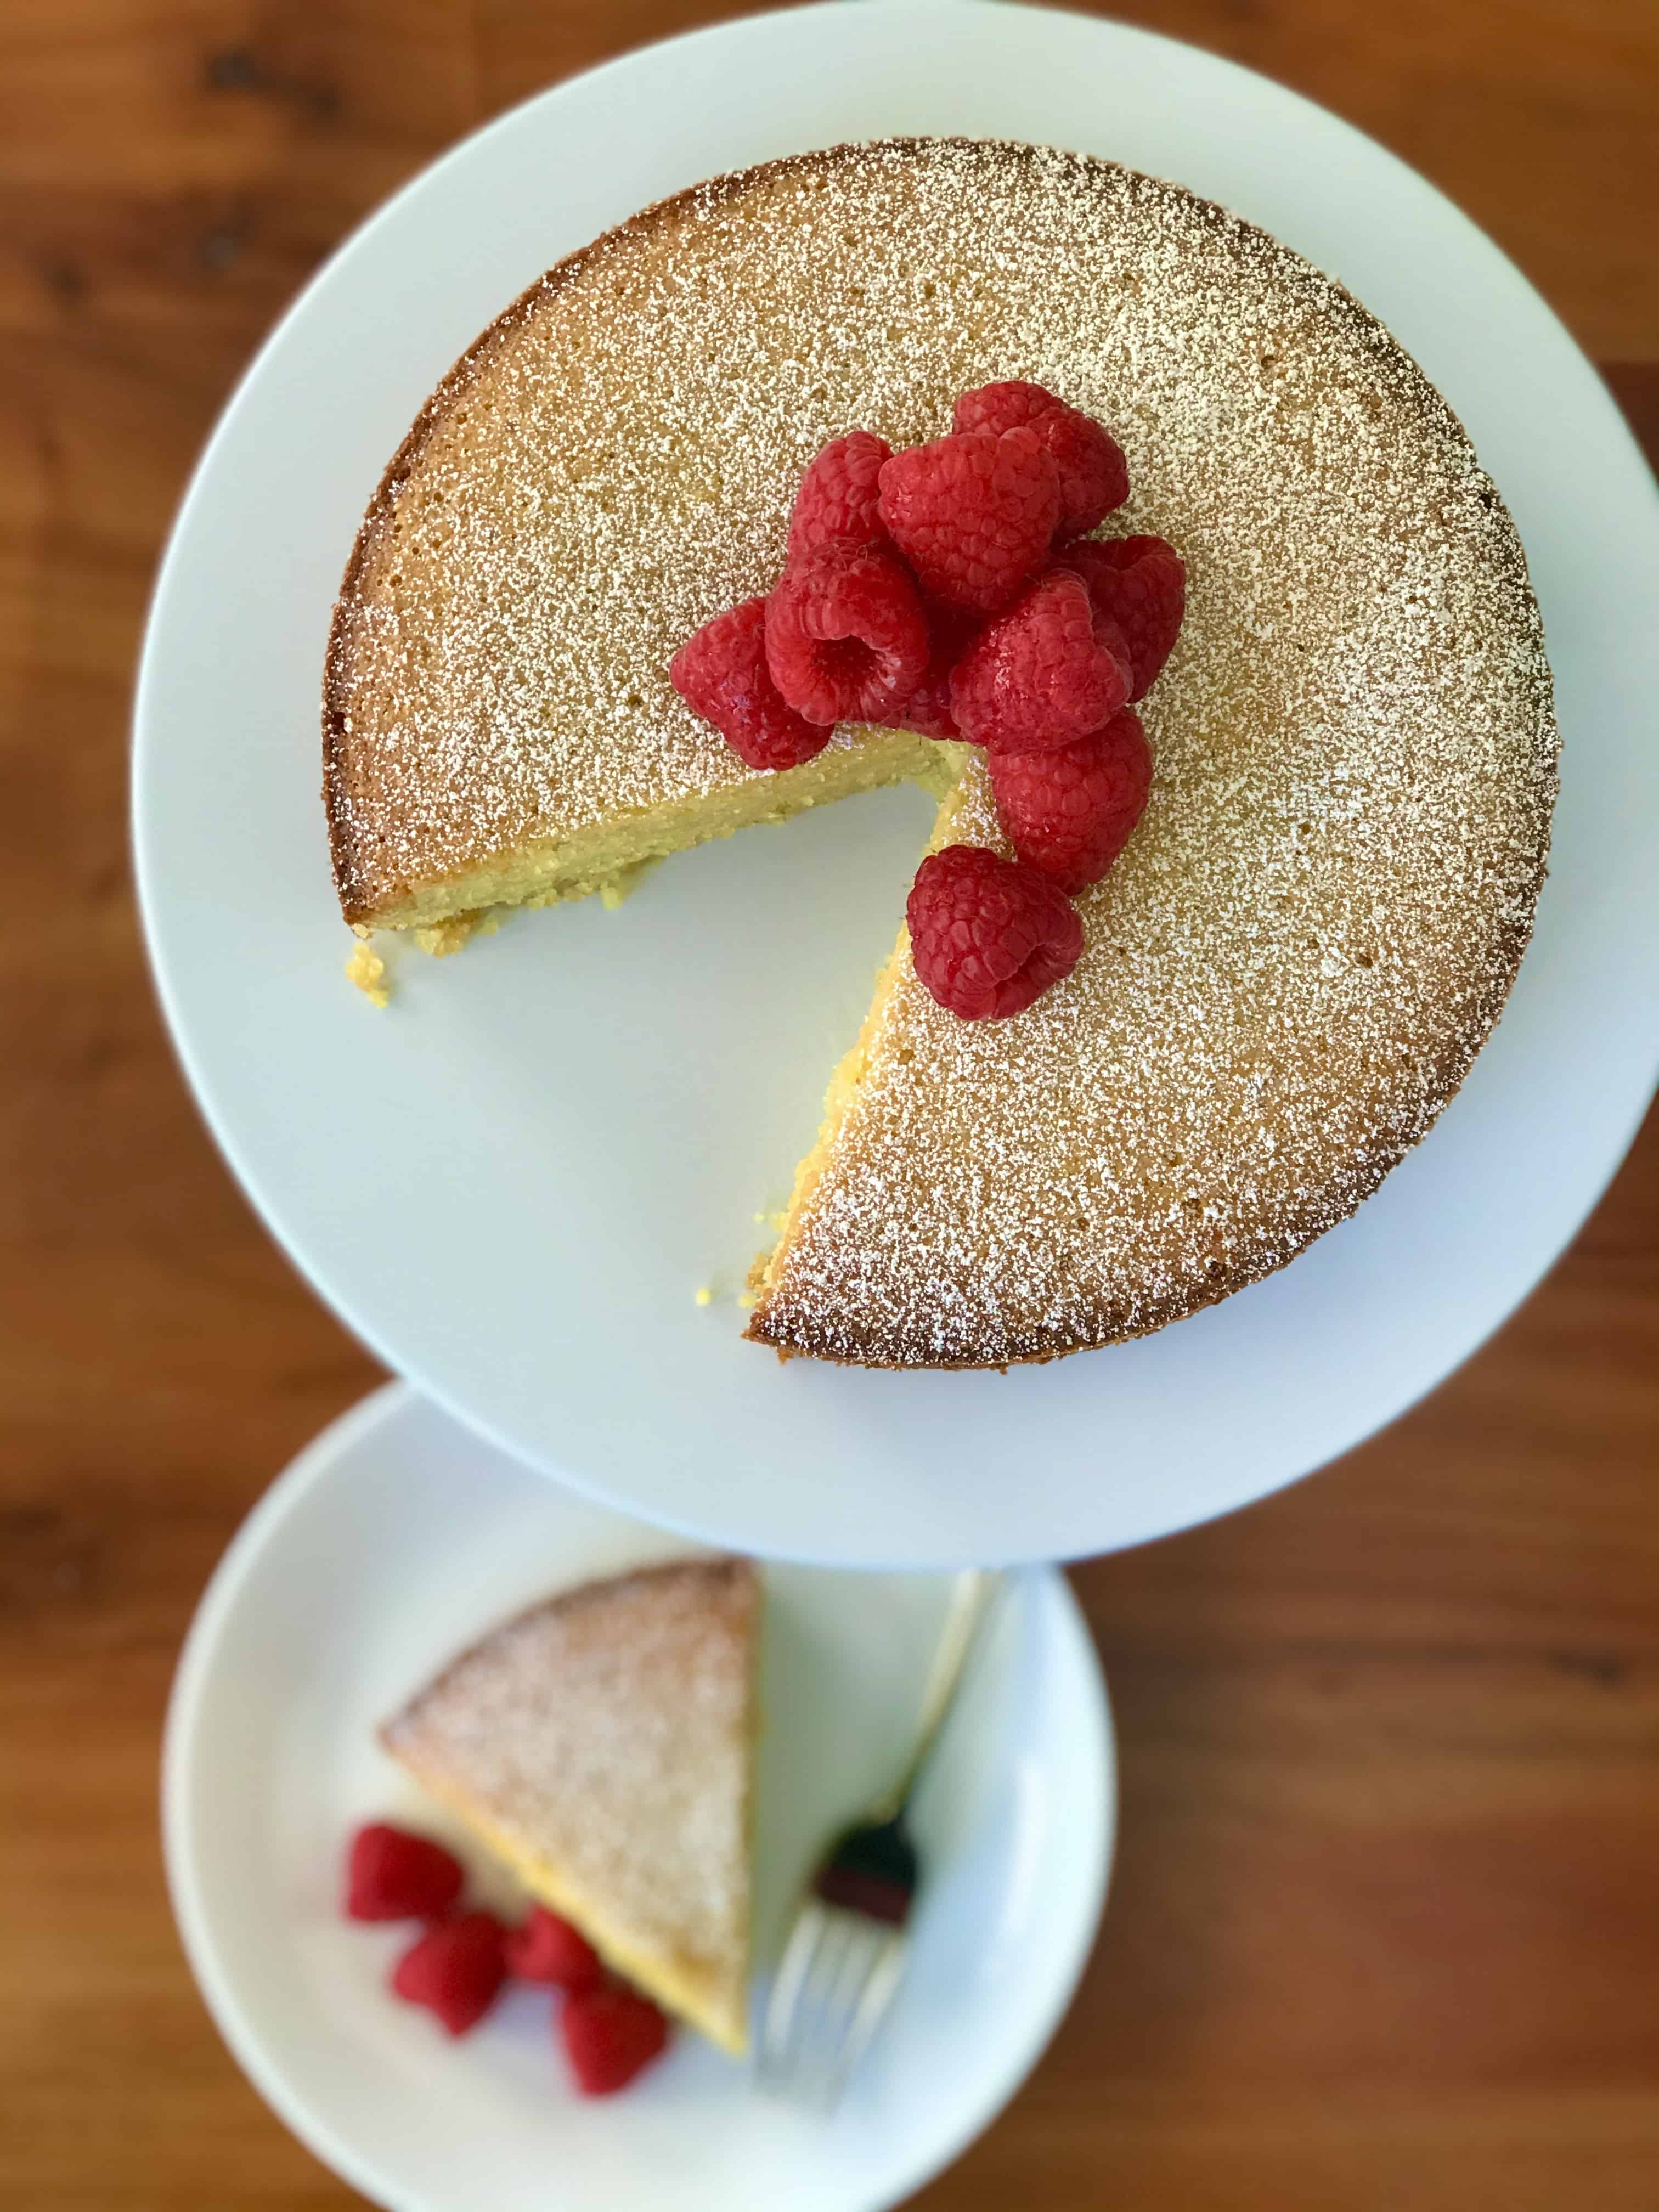 An Italian cake made with polenta and olive oil on a white platter next to a slice on a white plate with raspberries